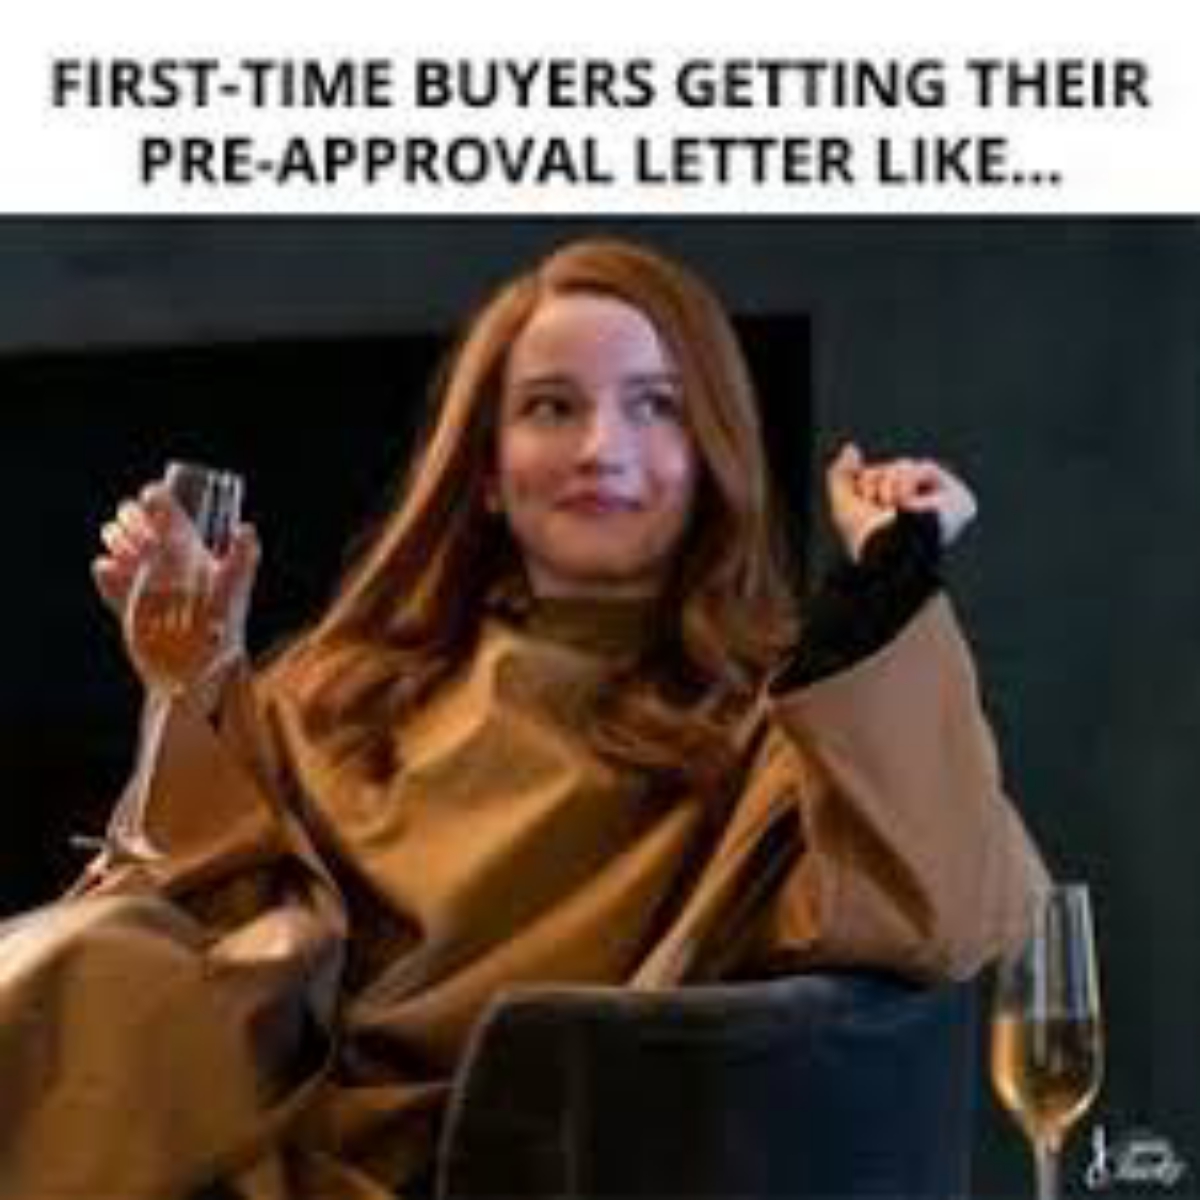 One of the best feelings!
#FirstTimeHomeBuyer #Mortgage #PreApproval #FairwayNation